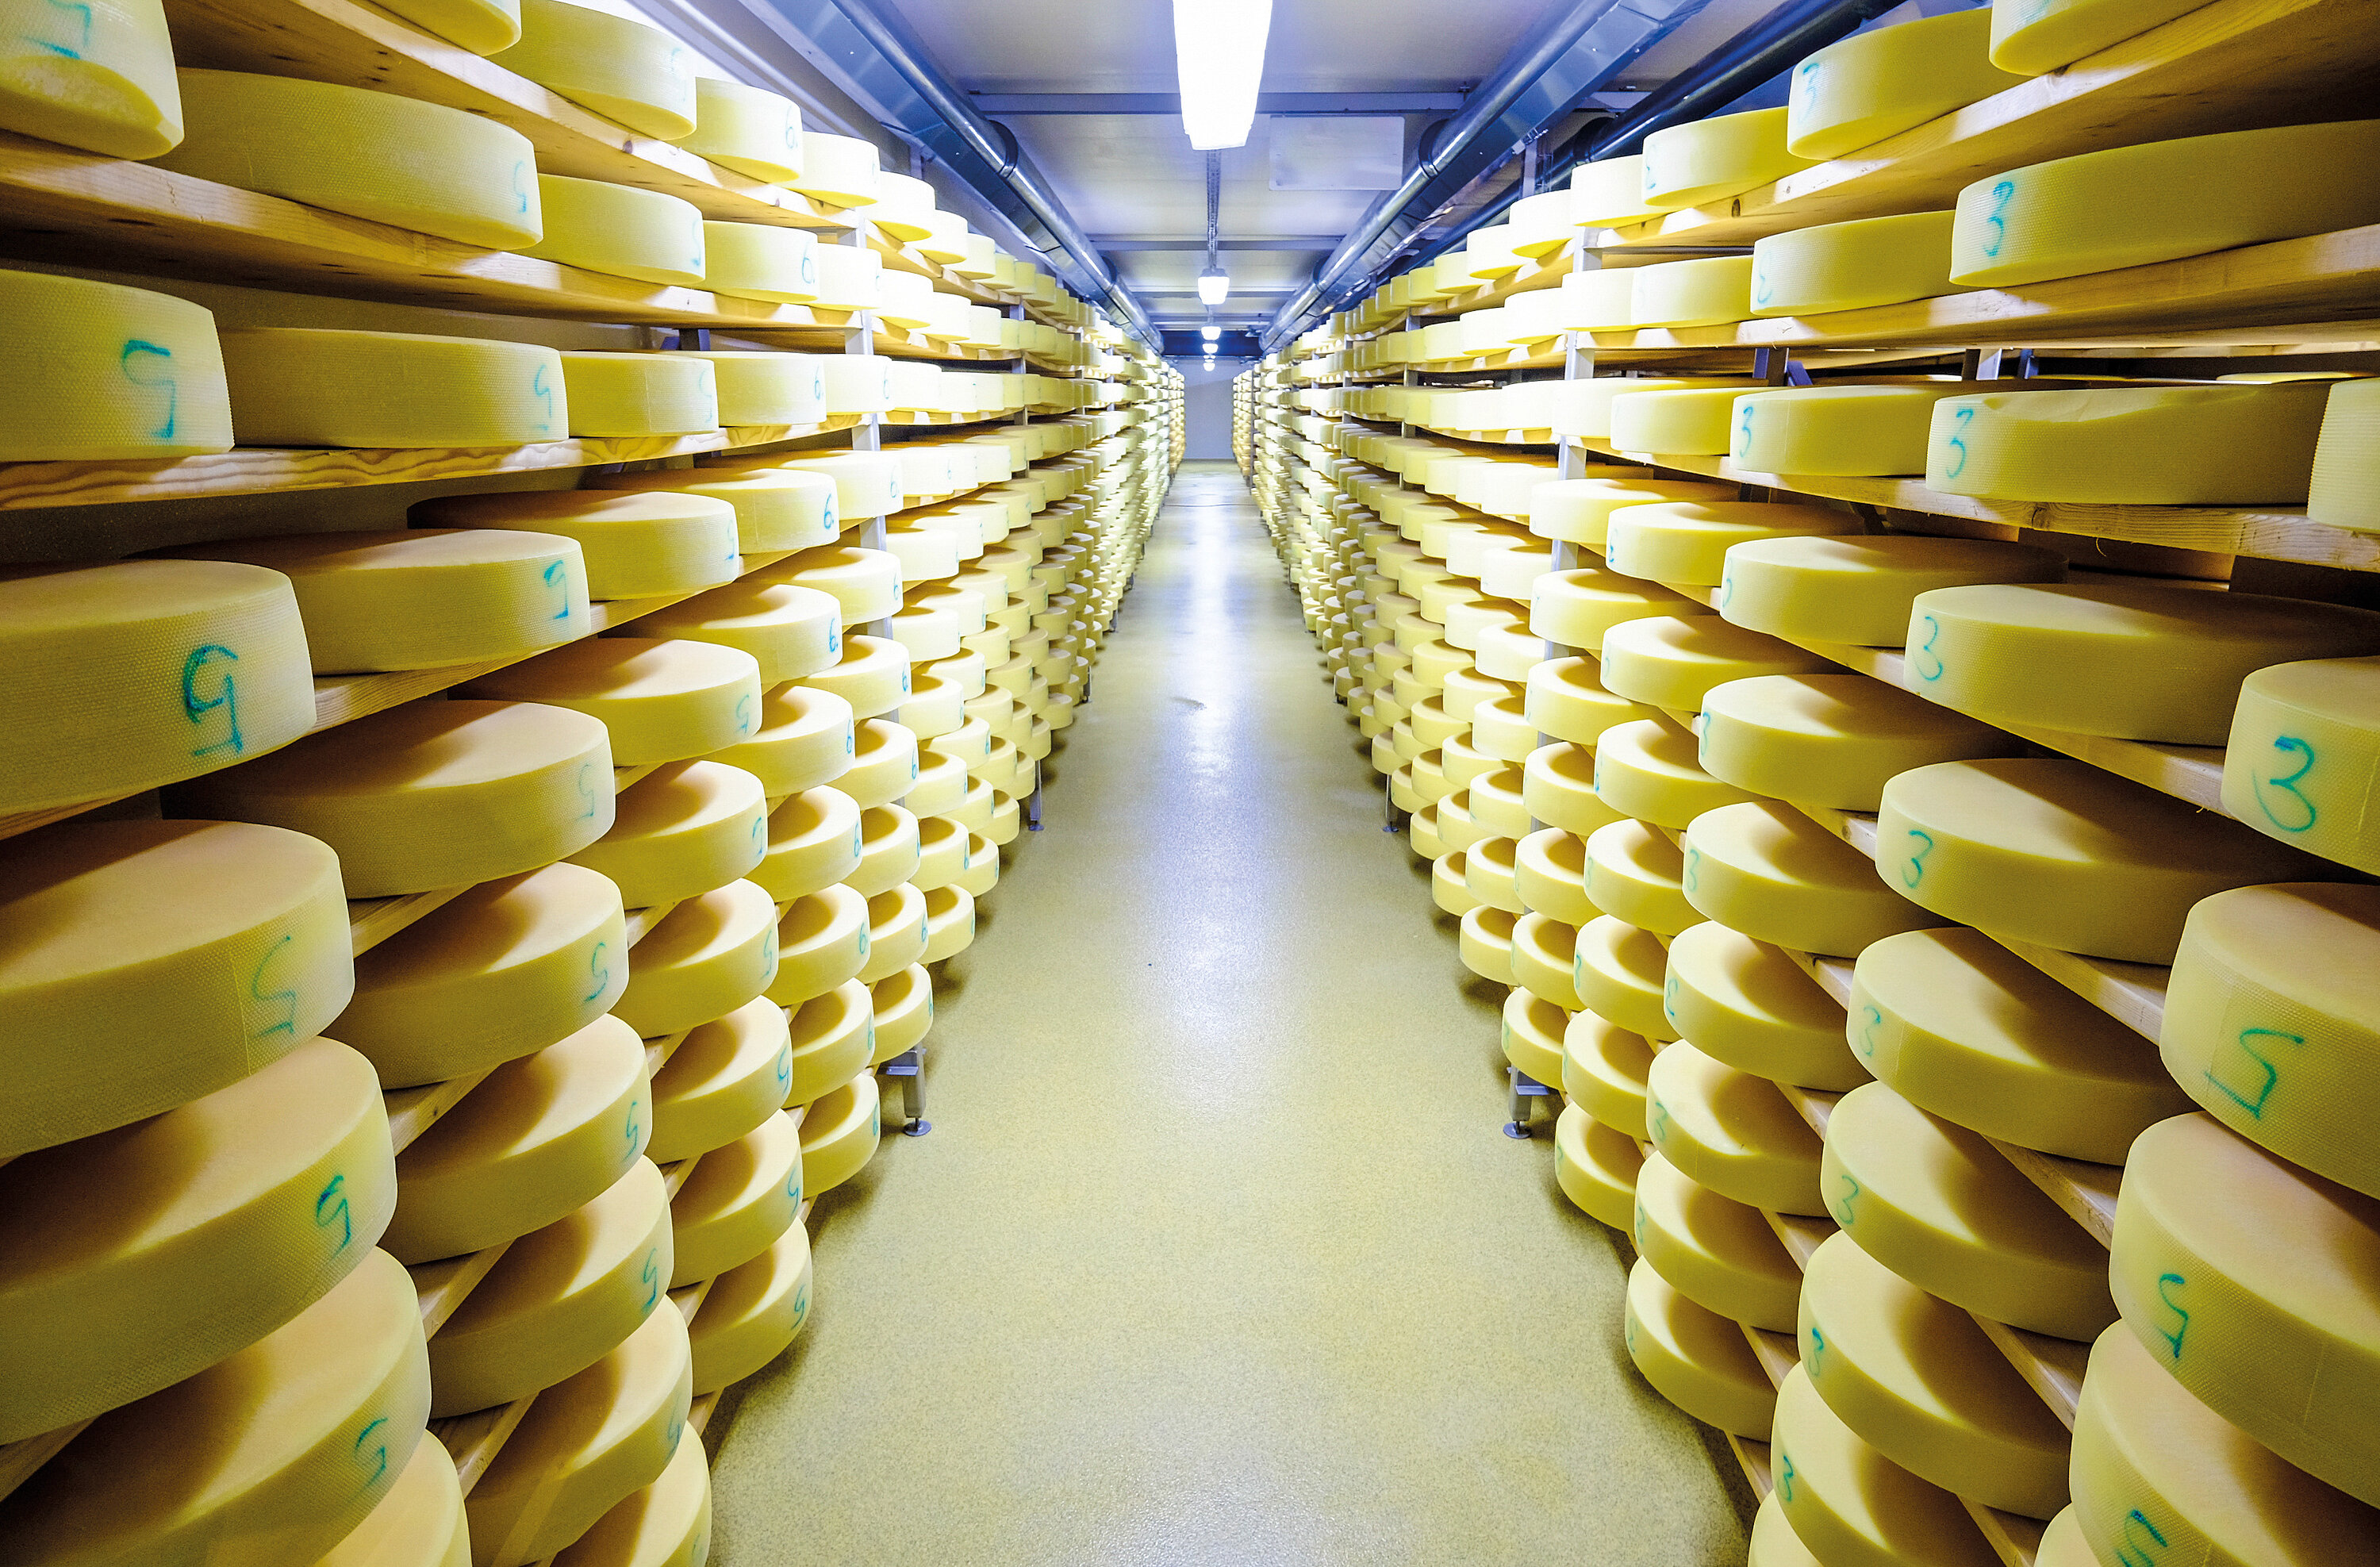  A long hallway with a shelf on the left and right side of the hallway. Per shelf there are ten shelves on which large cheese wheels lie next to each other.